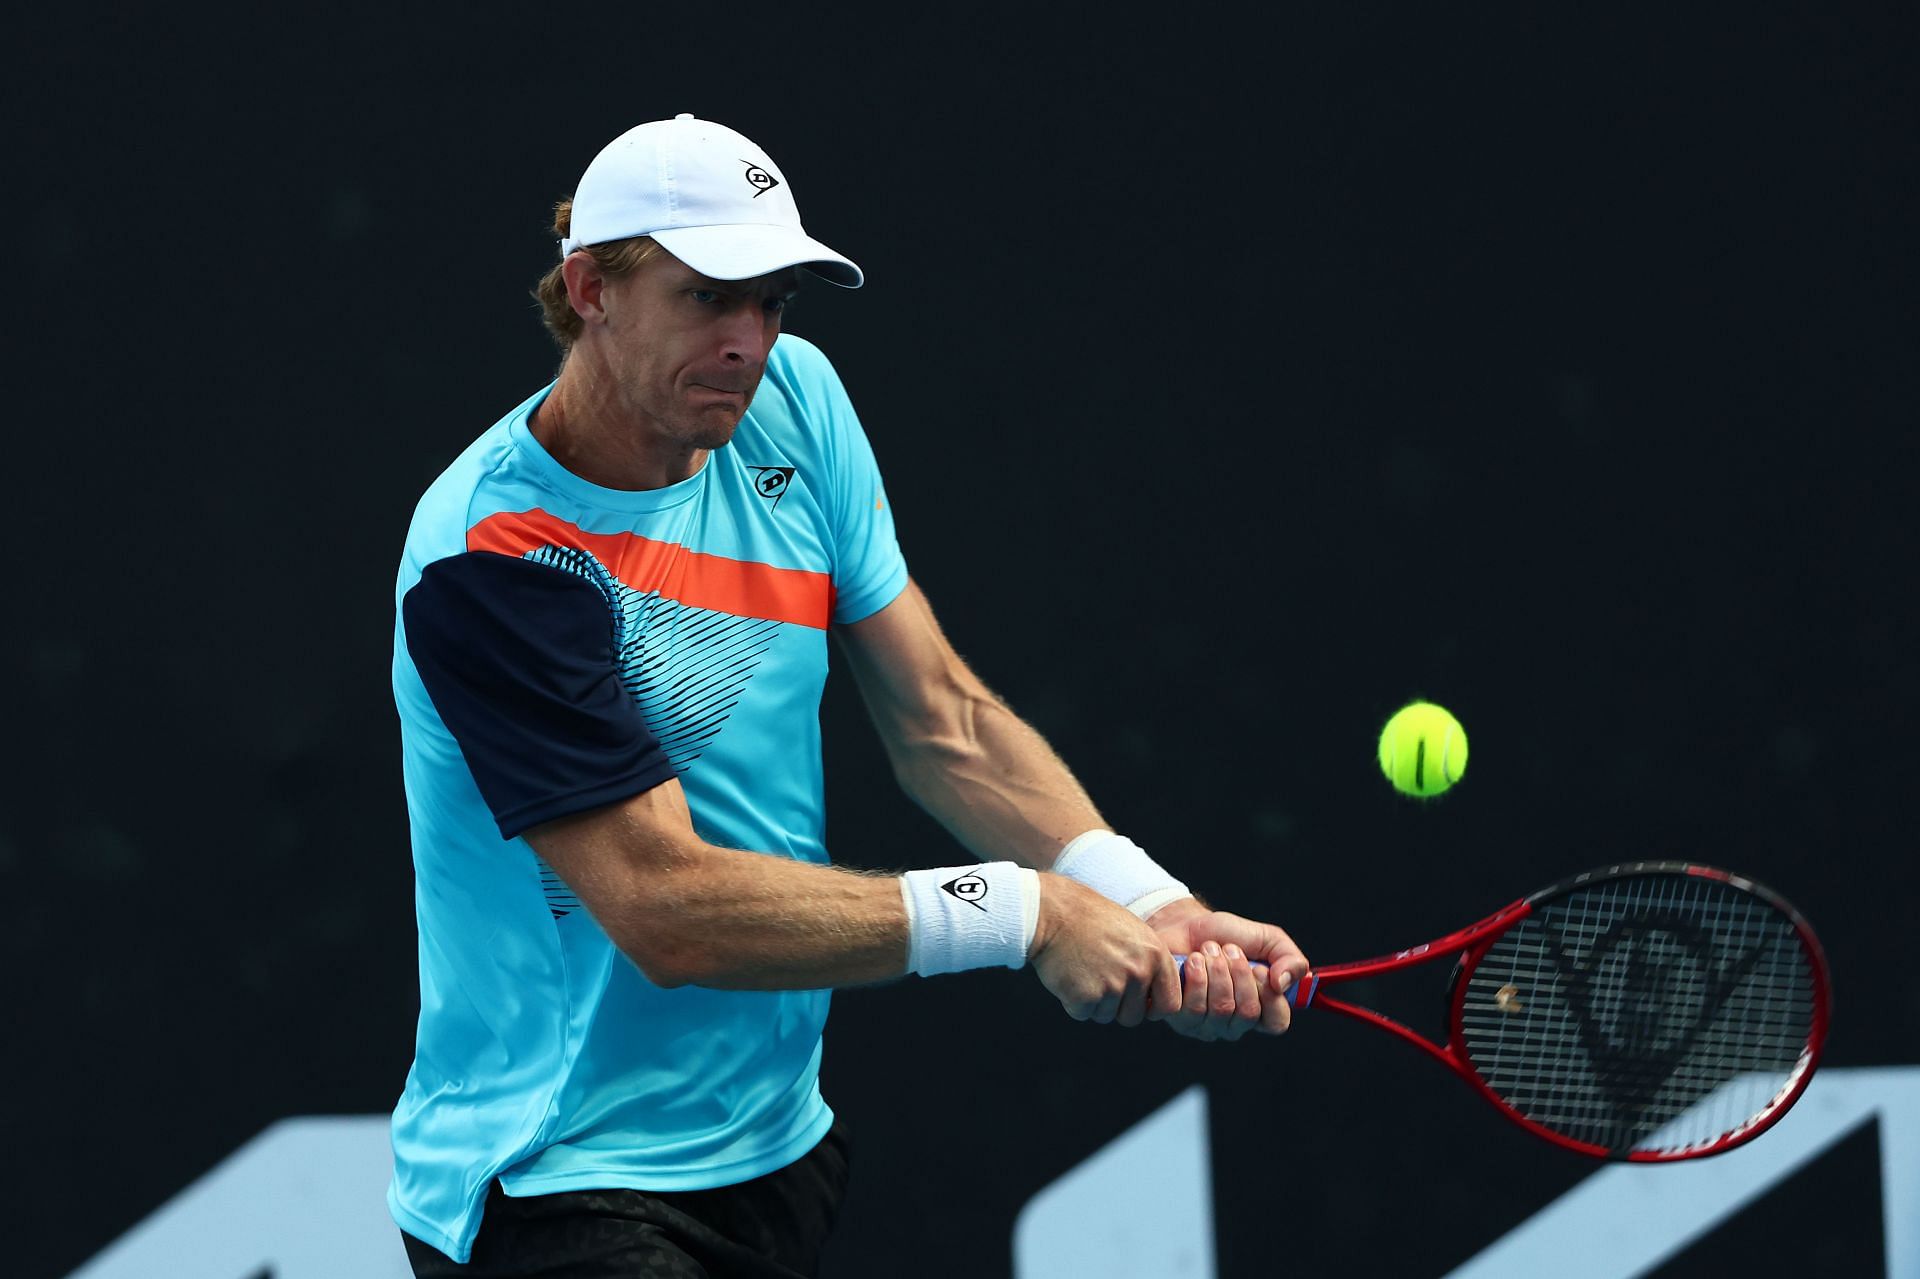 Kevin Anderson strikes a backhand at 2022 Australian Open.